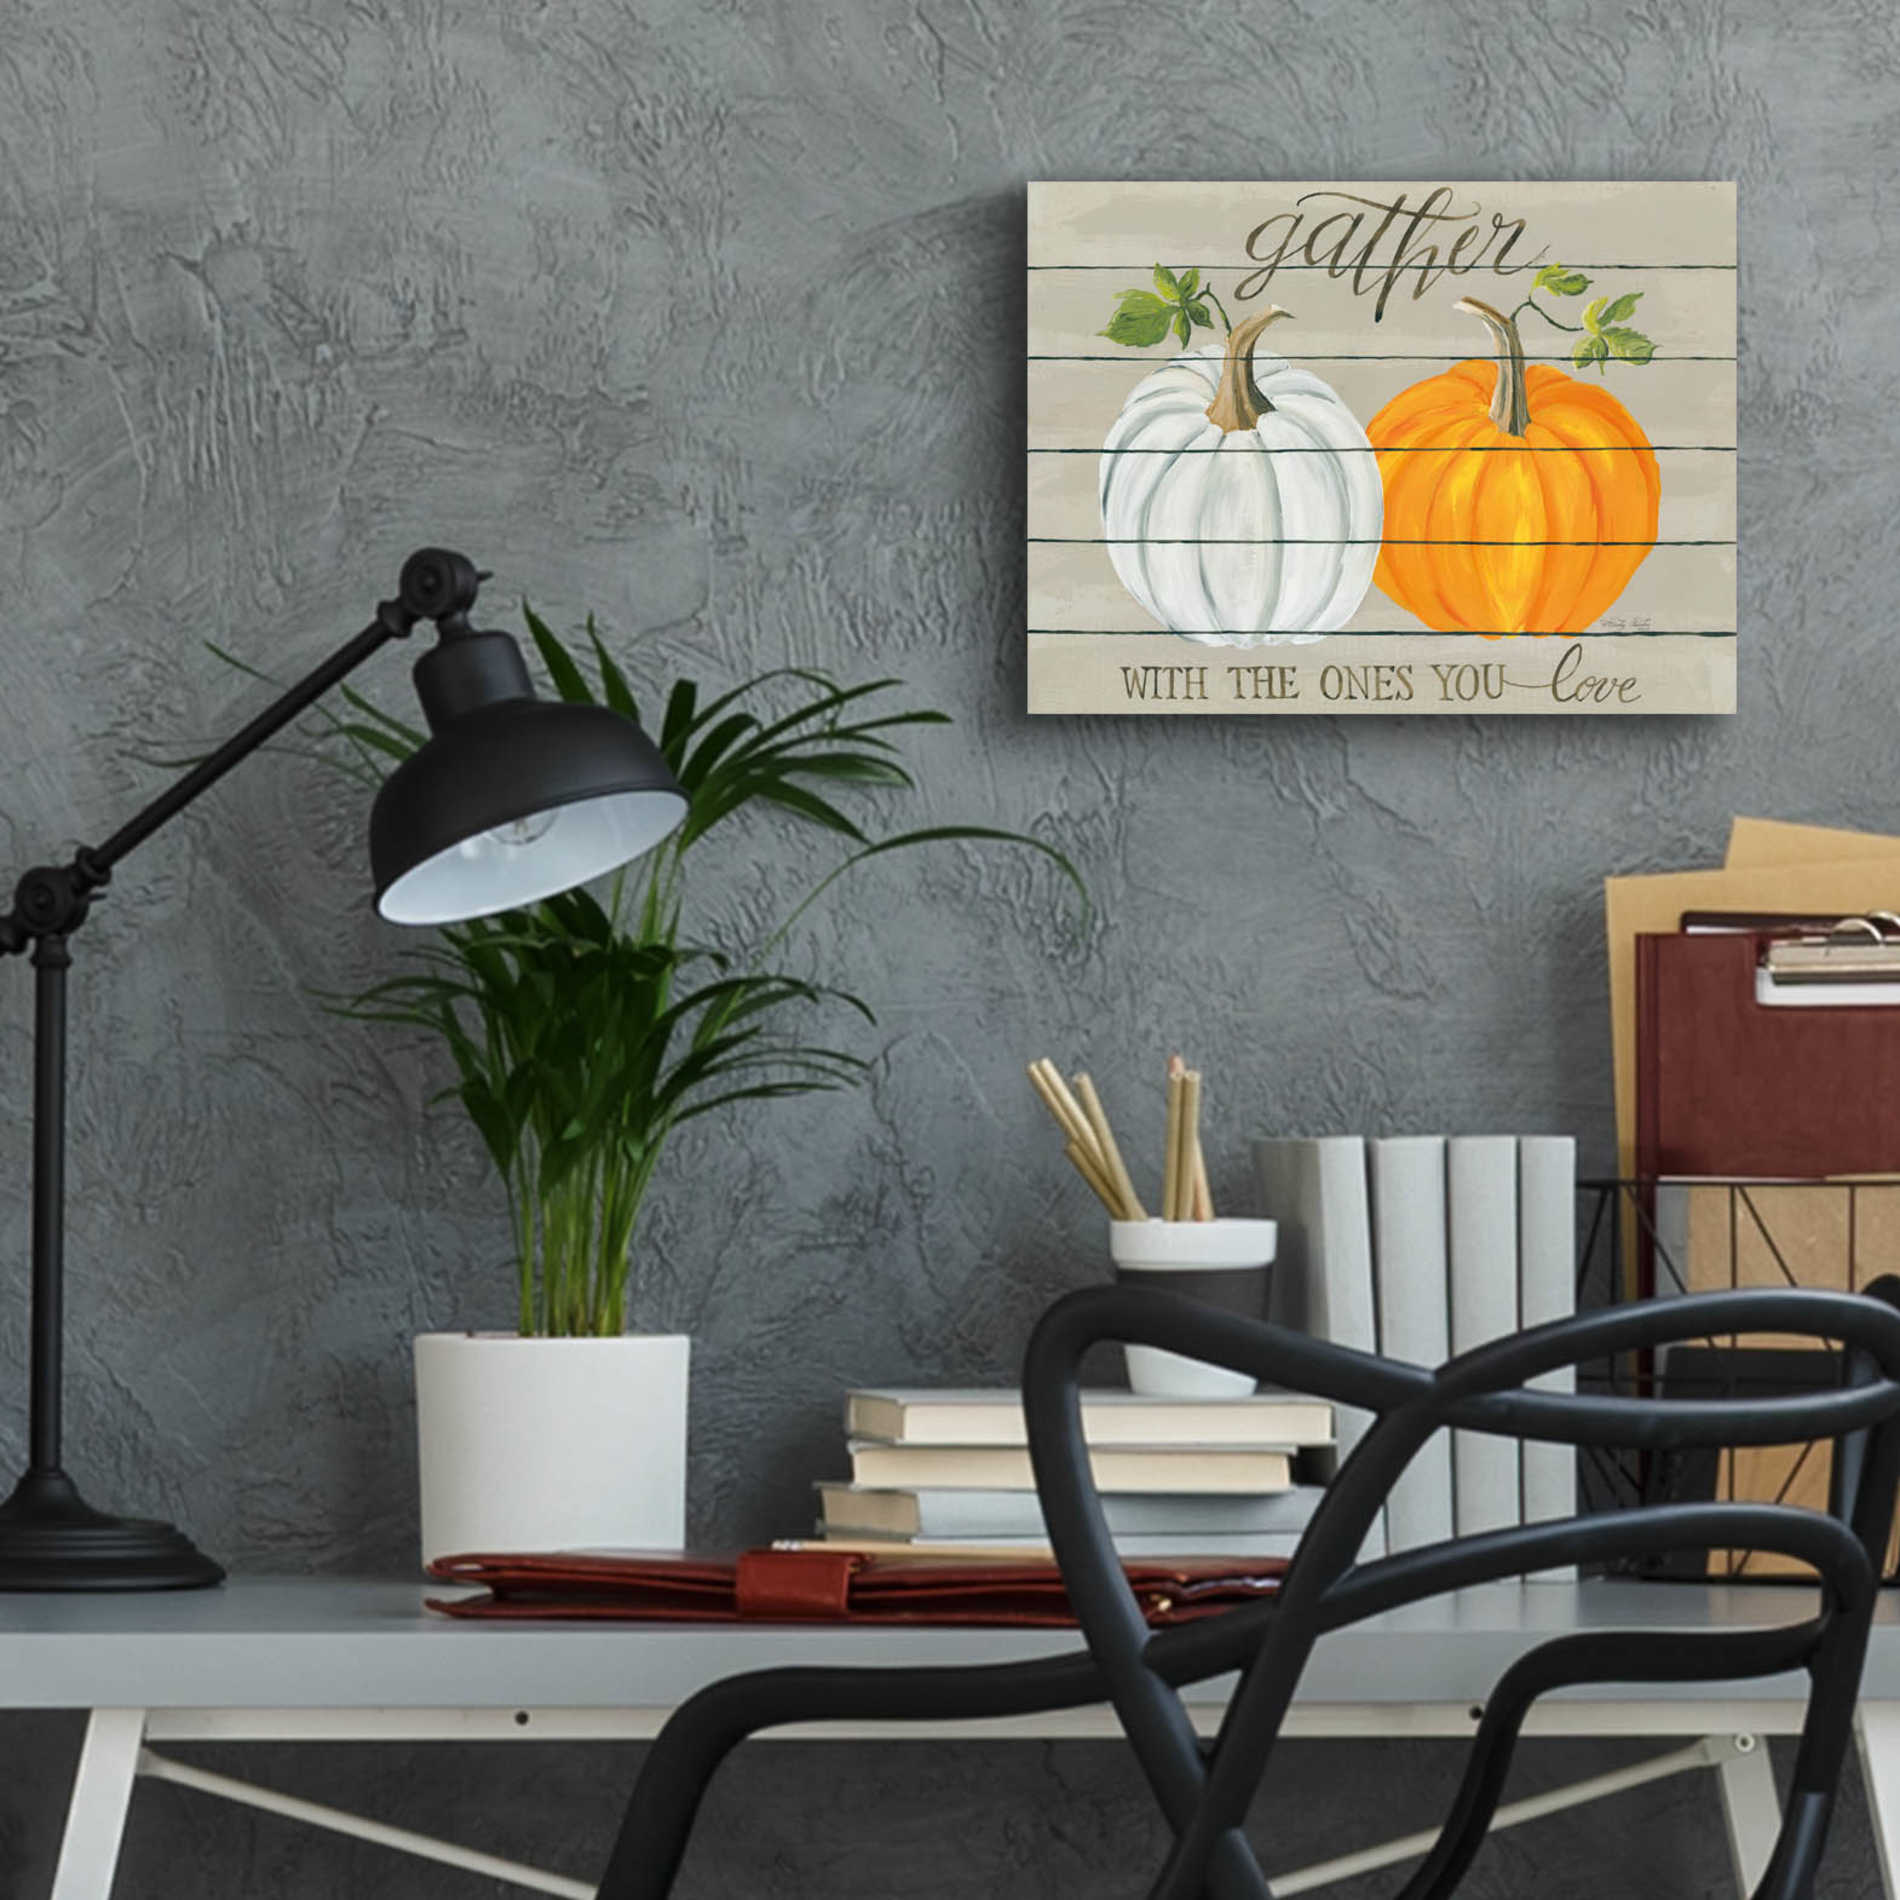 Epic Art 'Gather With The Ones You Love Pumpkins' by Cindy Jacobs, Acrylic Glass Wall Art,16x12